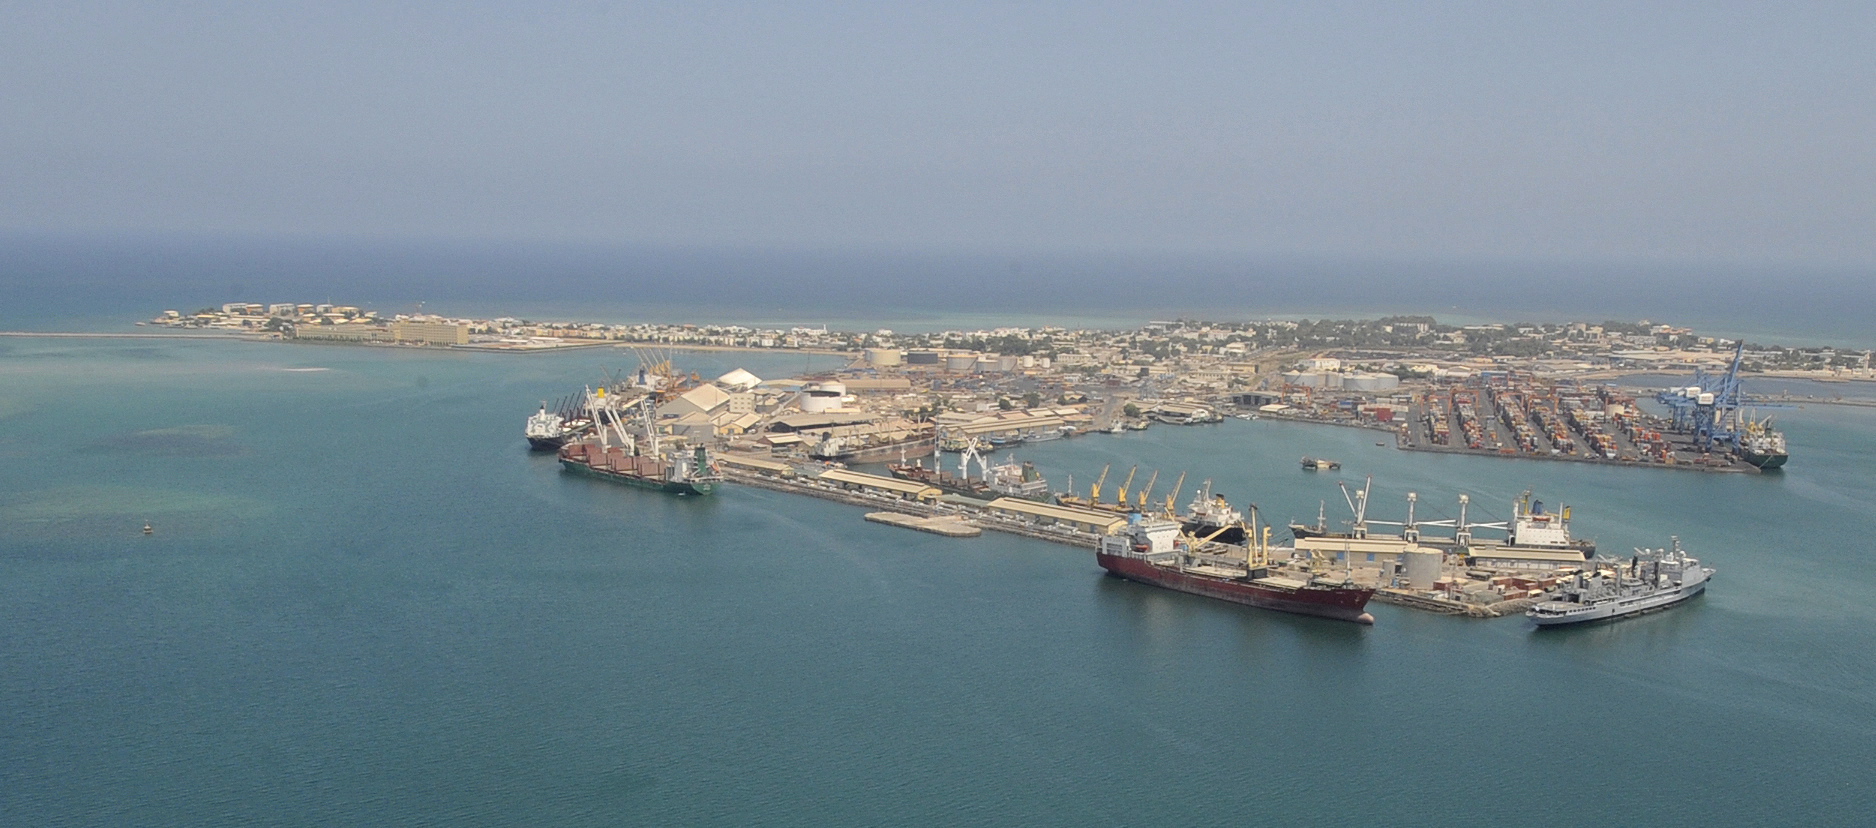 How an Ethiopia-backed port is changing power dynamics in the Horn of Africa